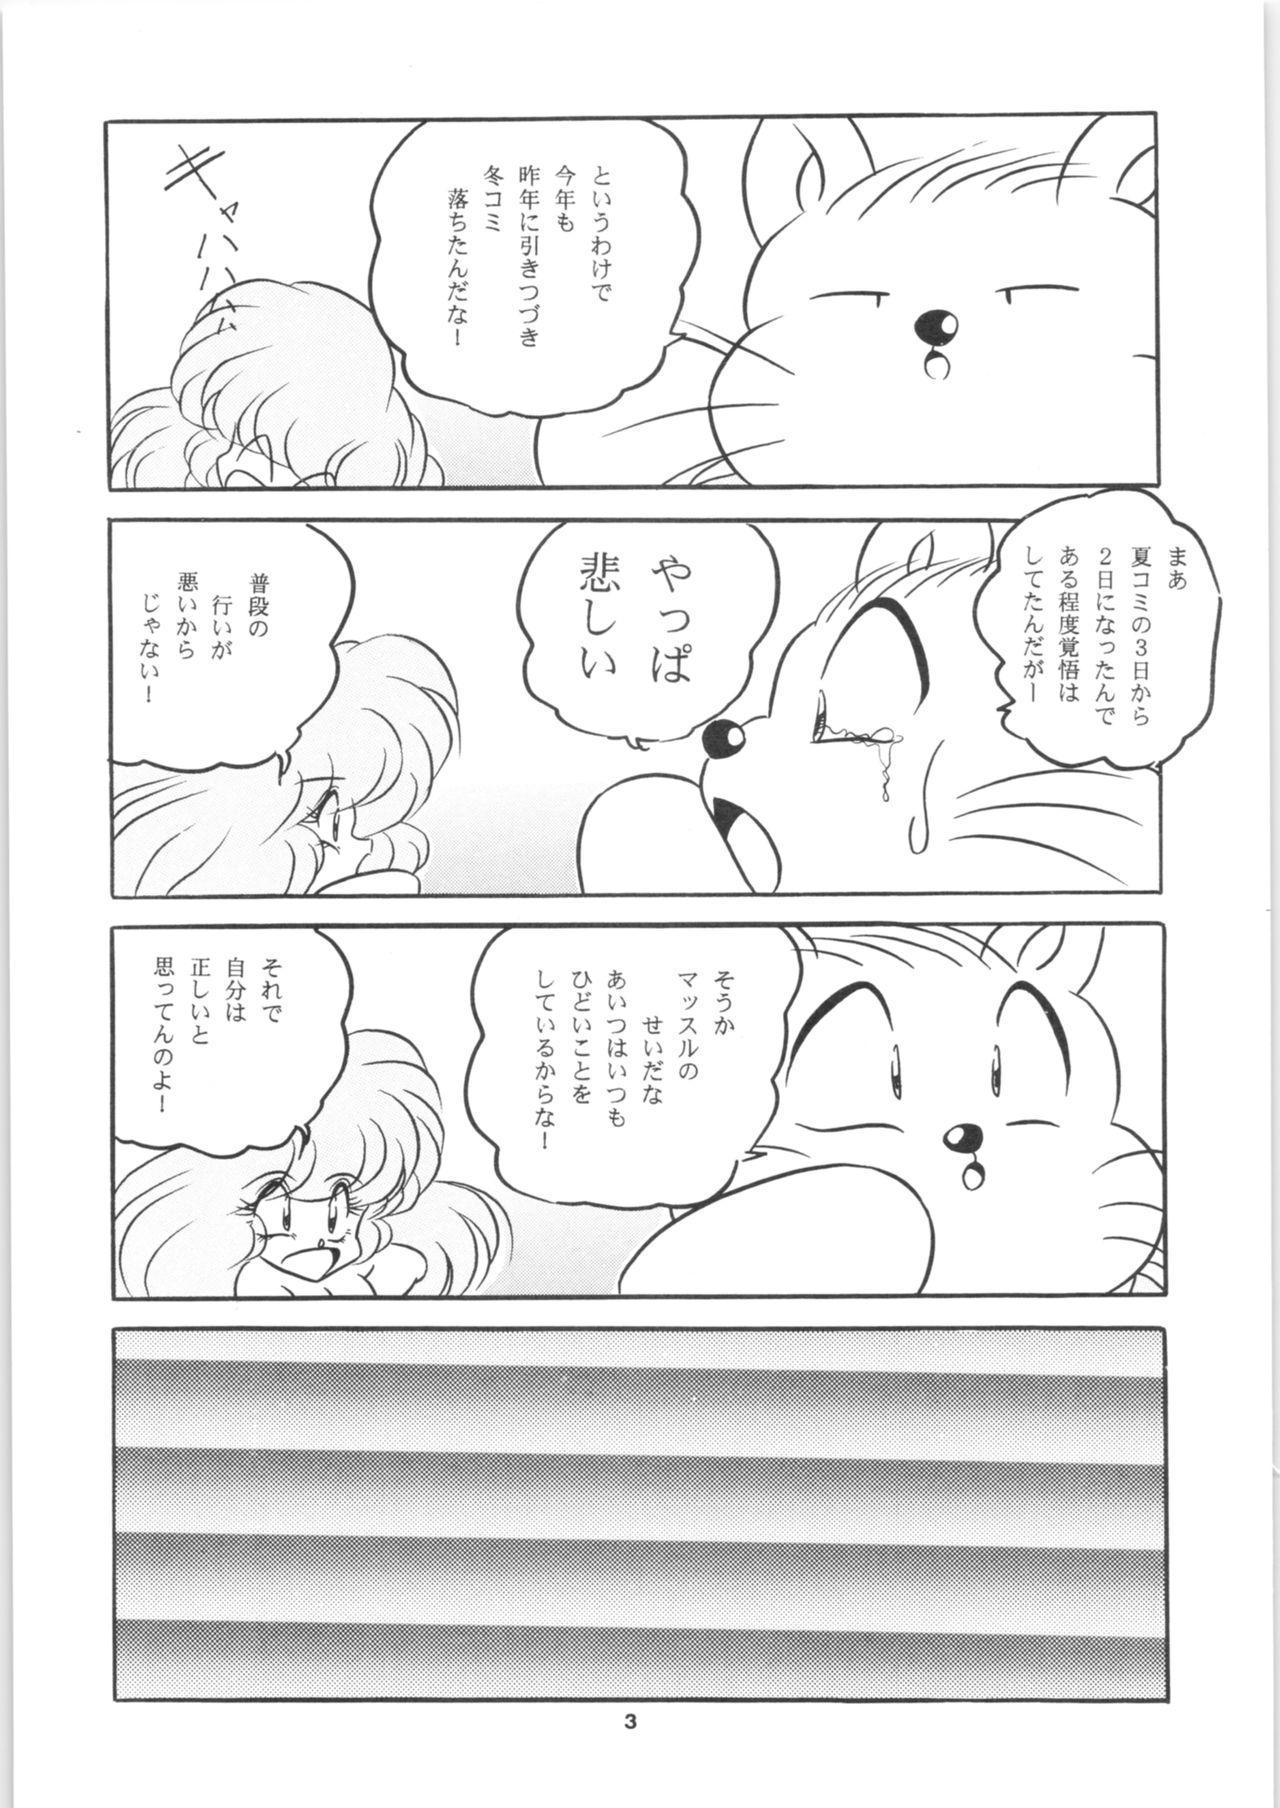 Tiny Titties C-COMPANY SPECIAL STAGE 17 - Ranma 12 Idol project Granny - Page 5